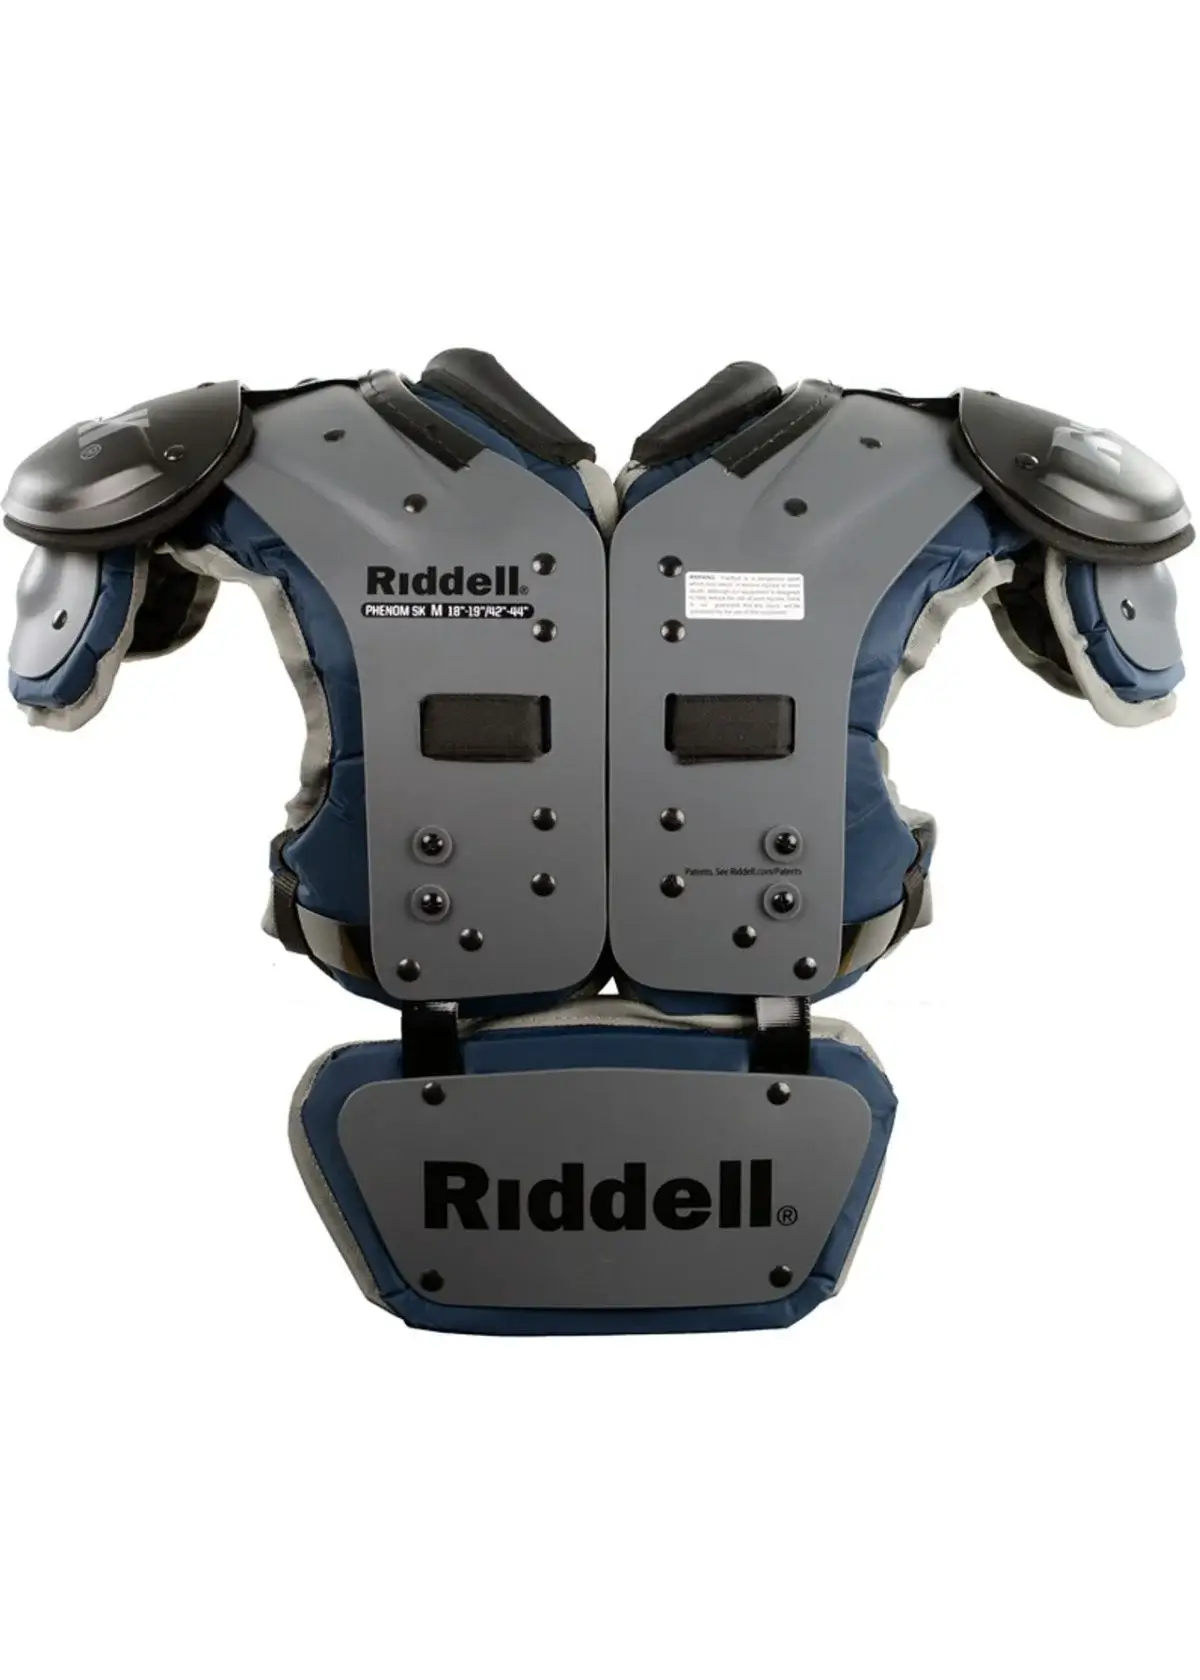 Why are shoulder pads important in football?